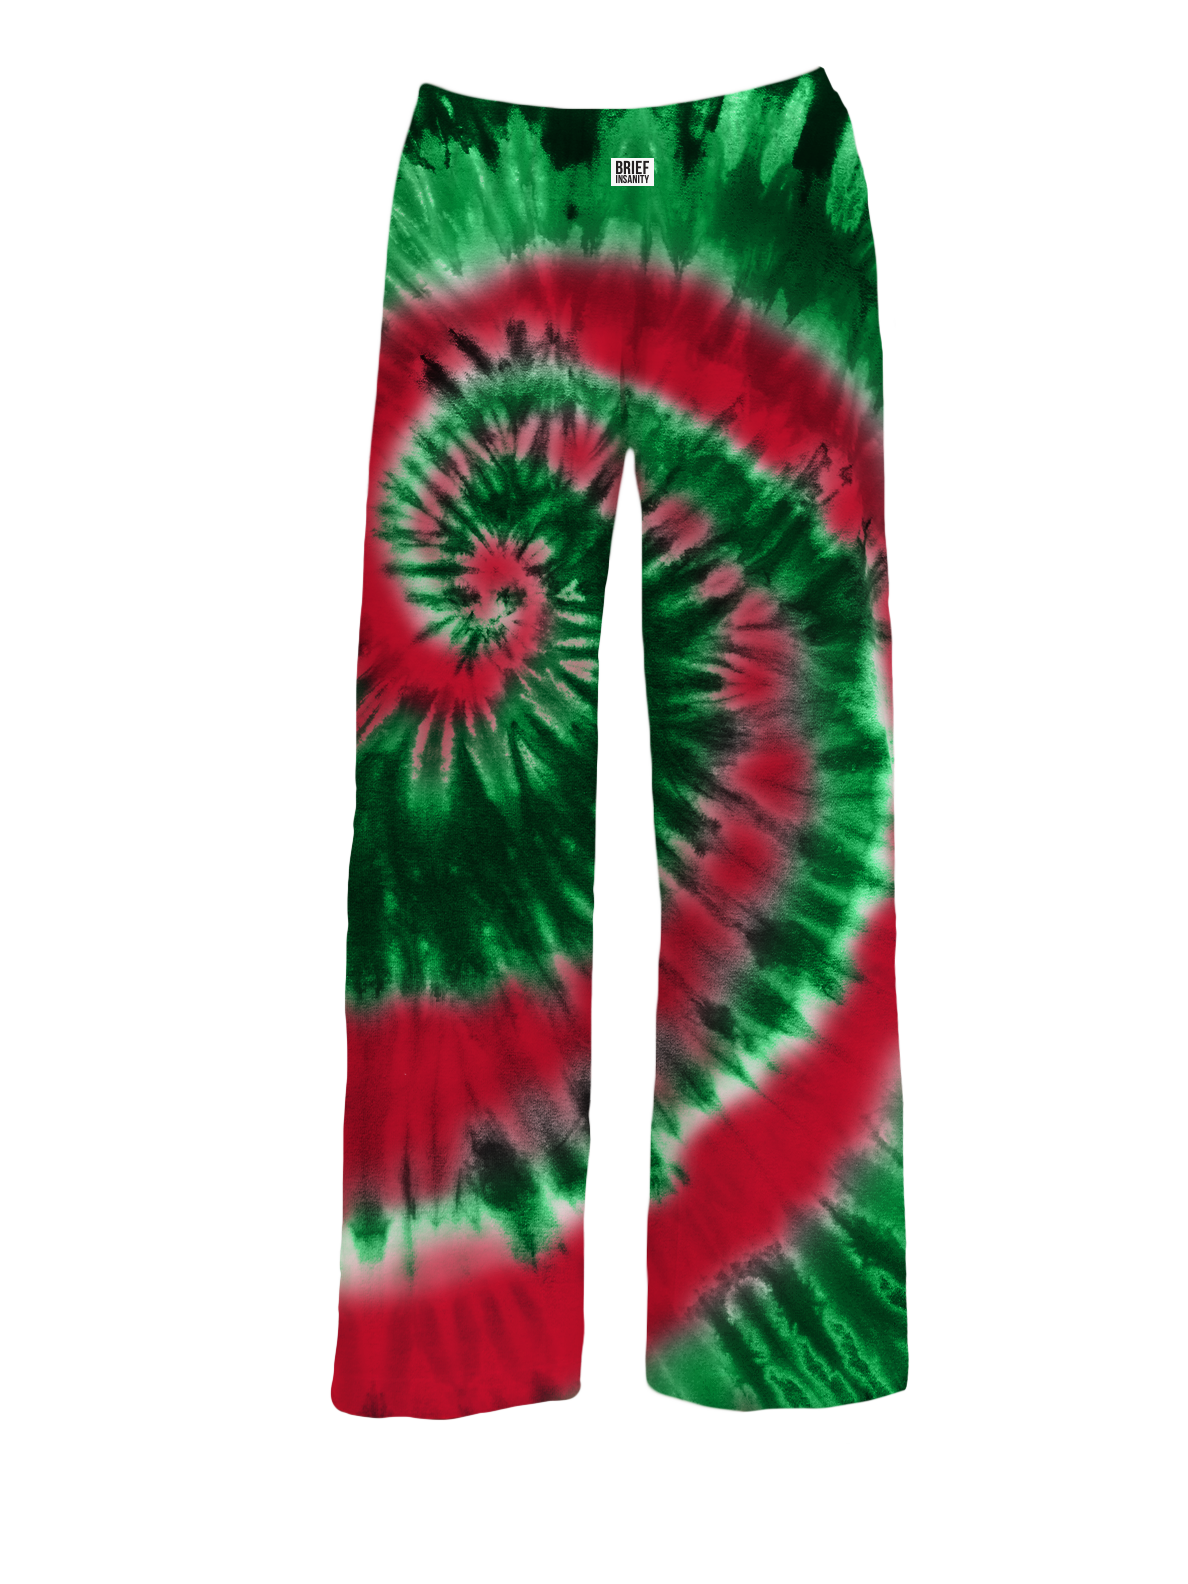 BRIEF INSANITY Red and Green Tie-Dye Pajama Pants